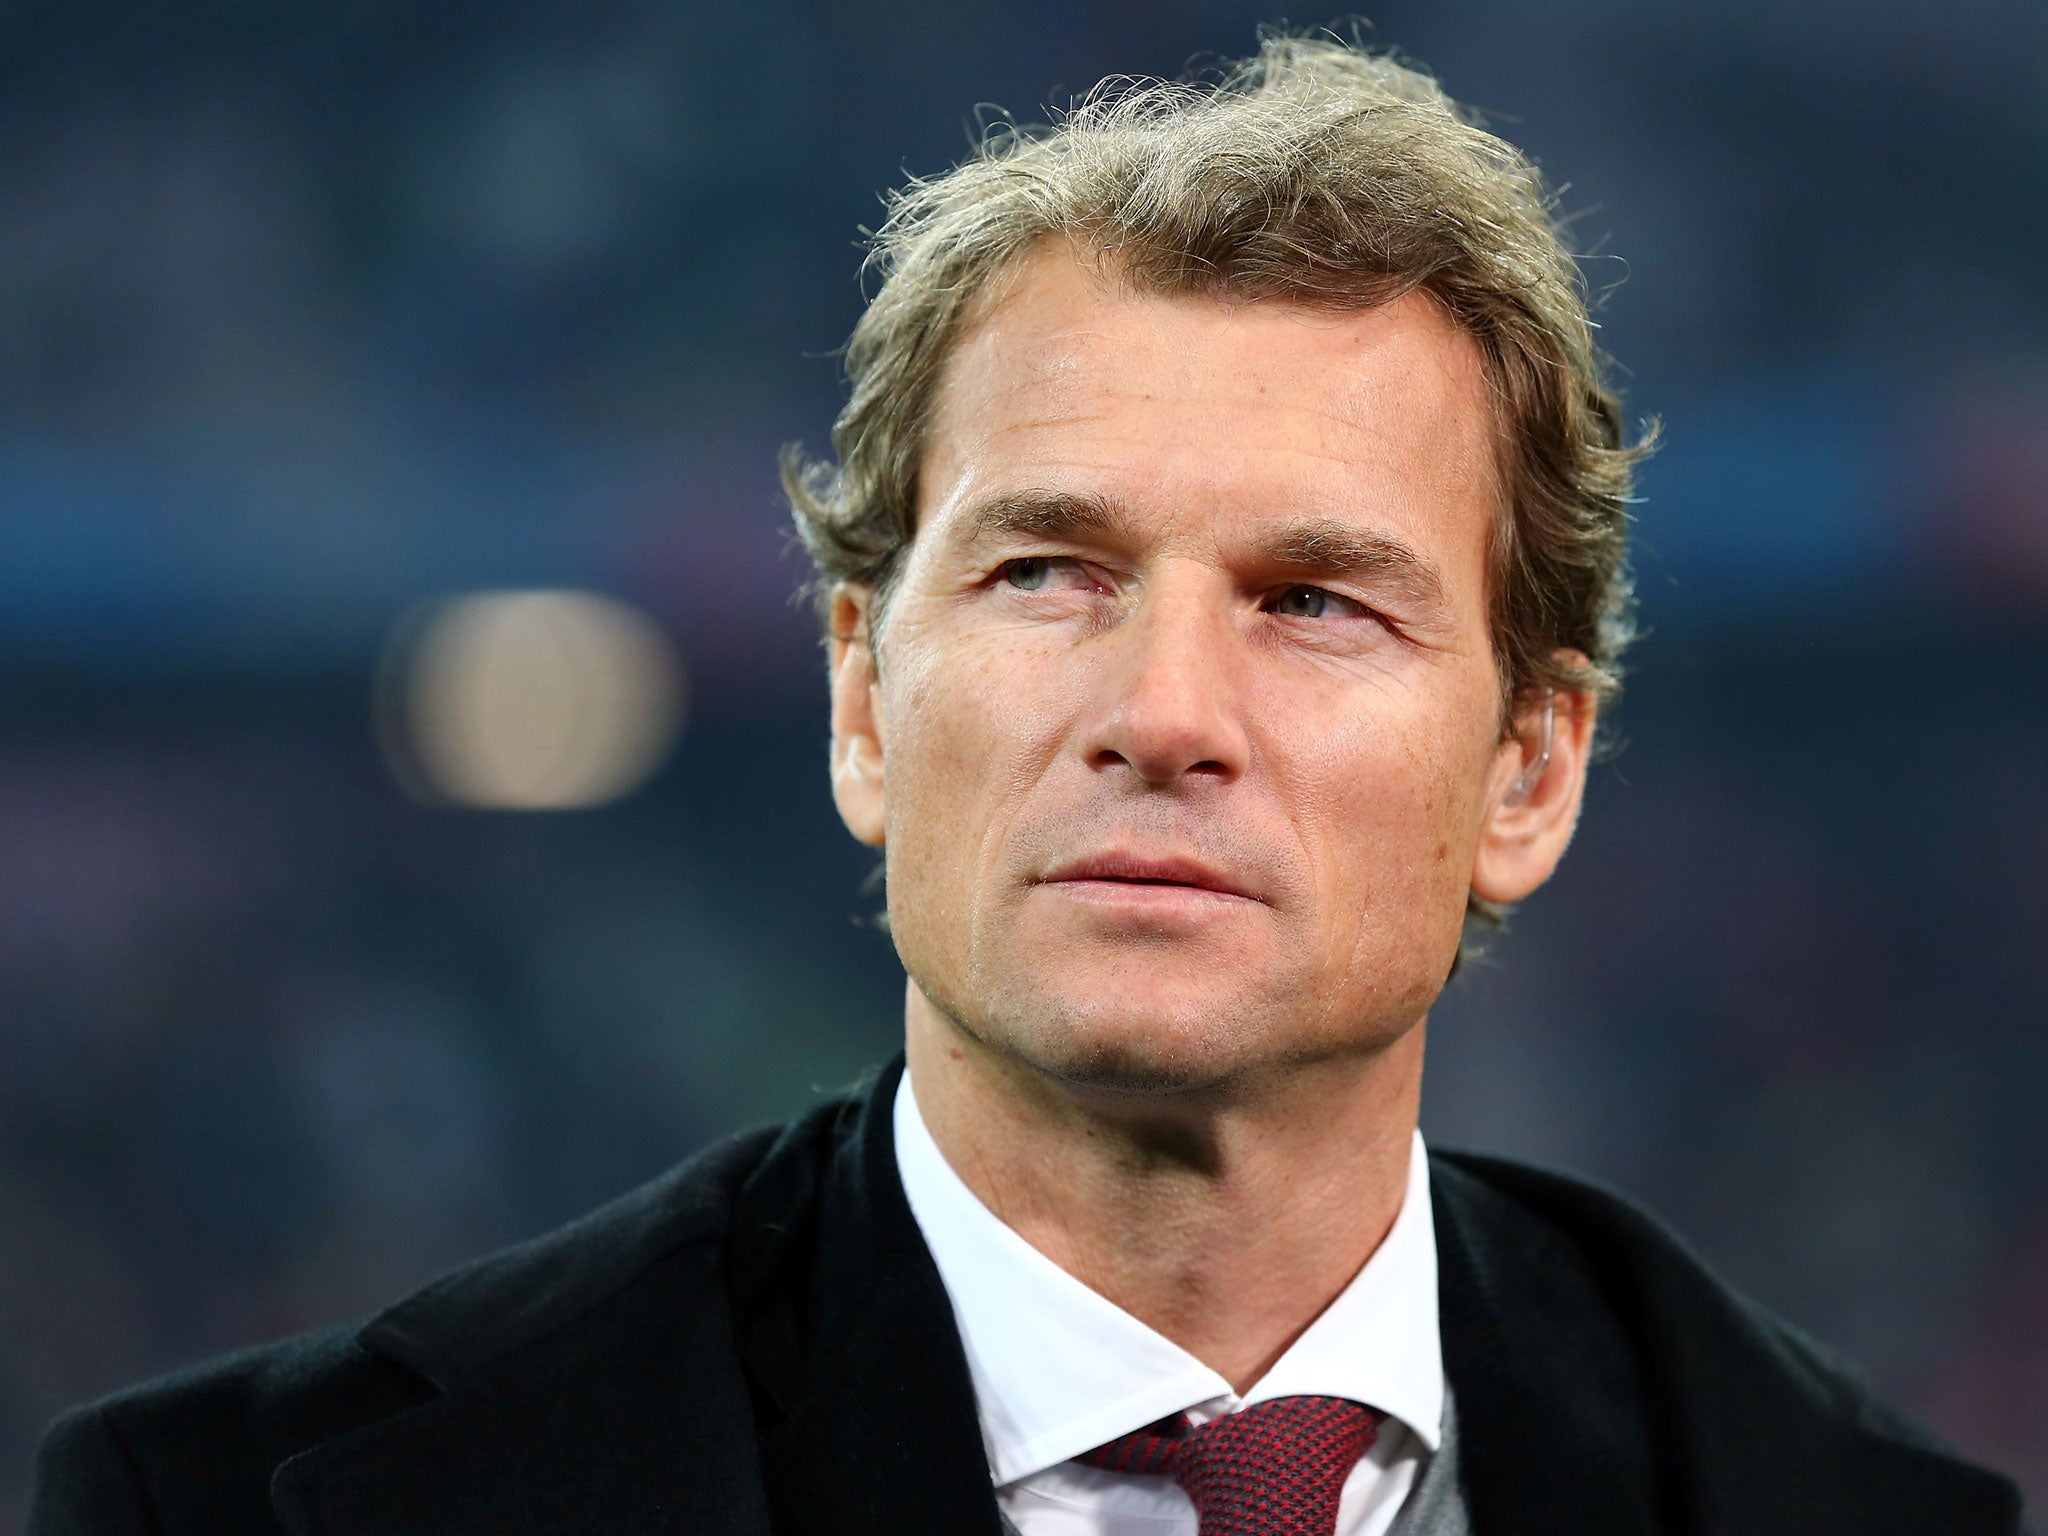 Jens Lehmann has offered a £2,000 reward for anyone that can return a bag and contents that he had stolen from him in London